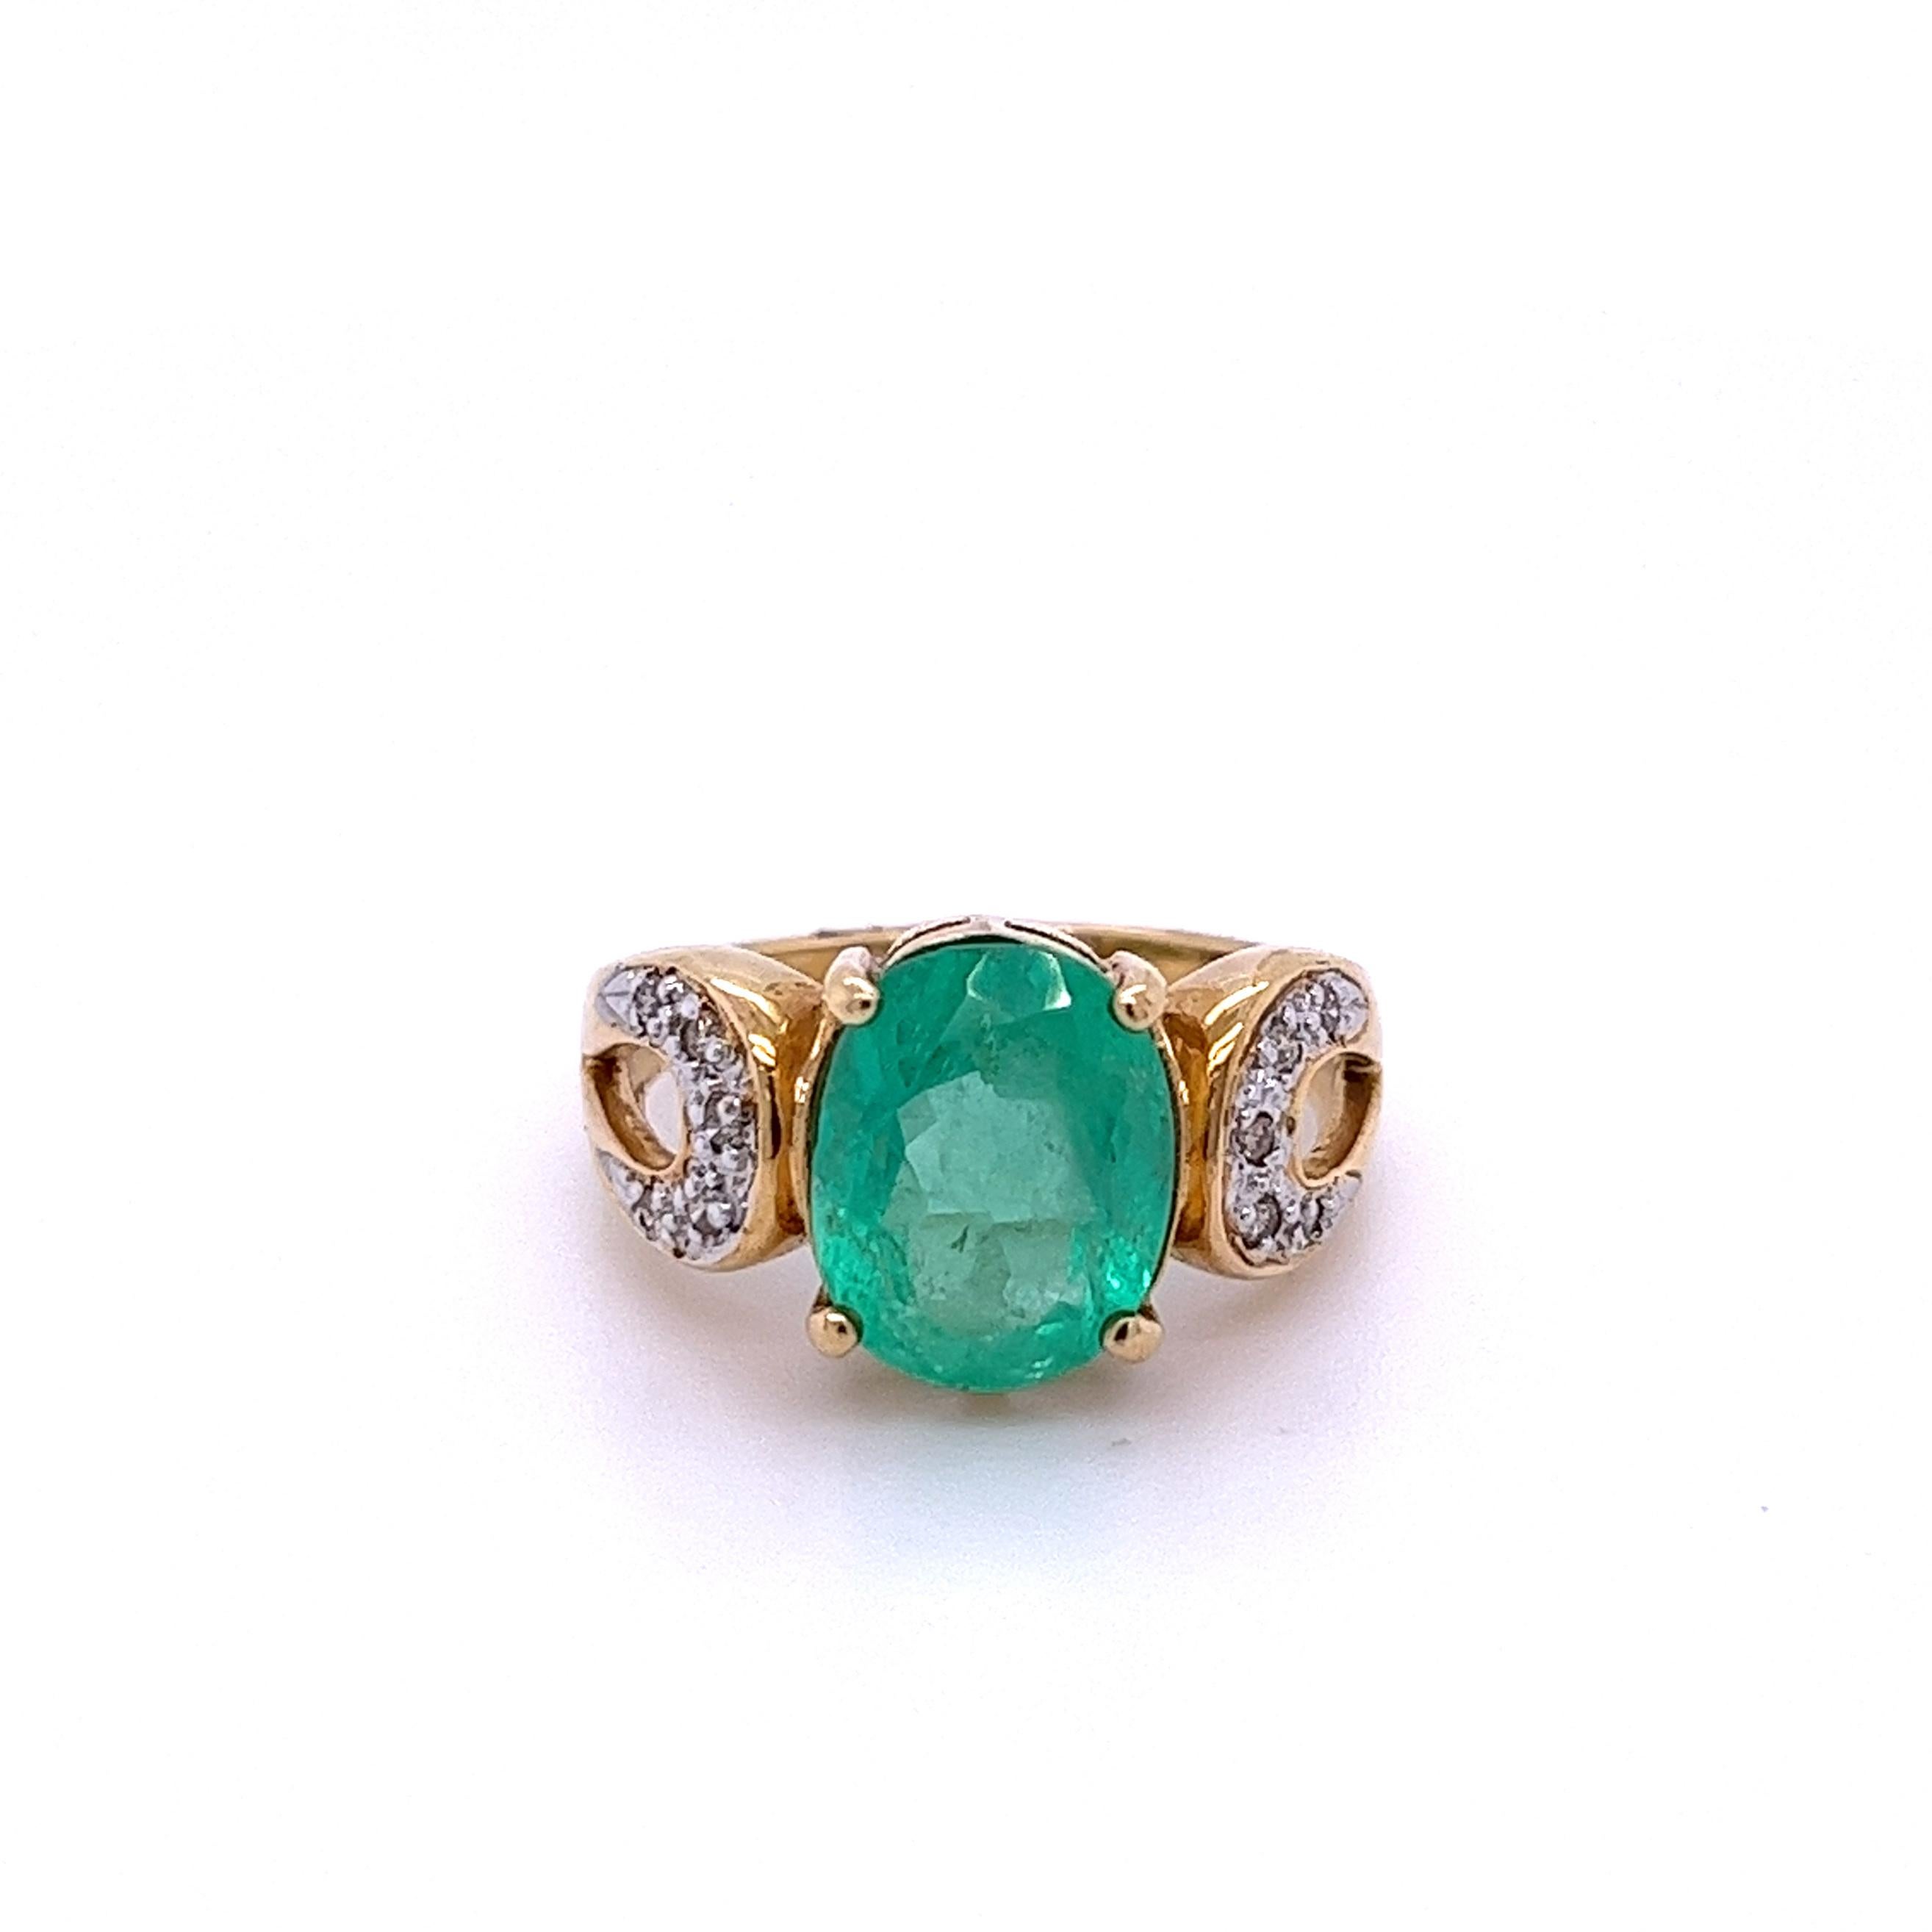 Oval cut natural Colombian Emerald mounted in a secure 14k solid gold ring setting with 0.16 carats in round diamond accents. 14k solid gold ring and secure prong setting make for a secure fit that's ideal for daily wear. Hypoallergenic,